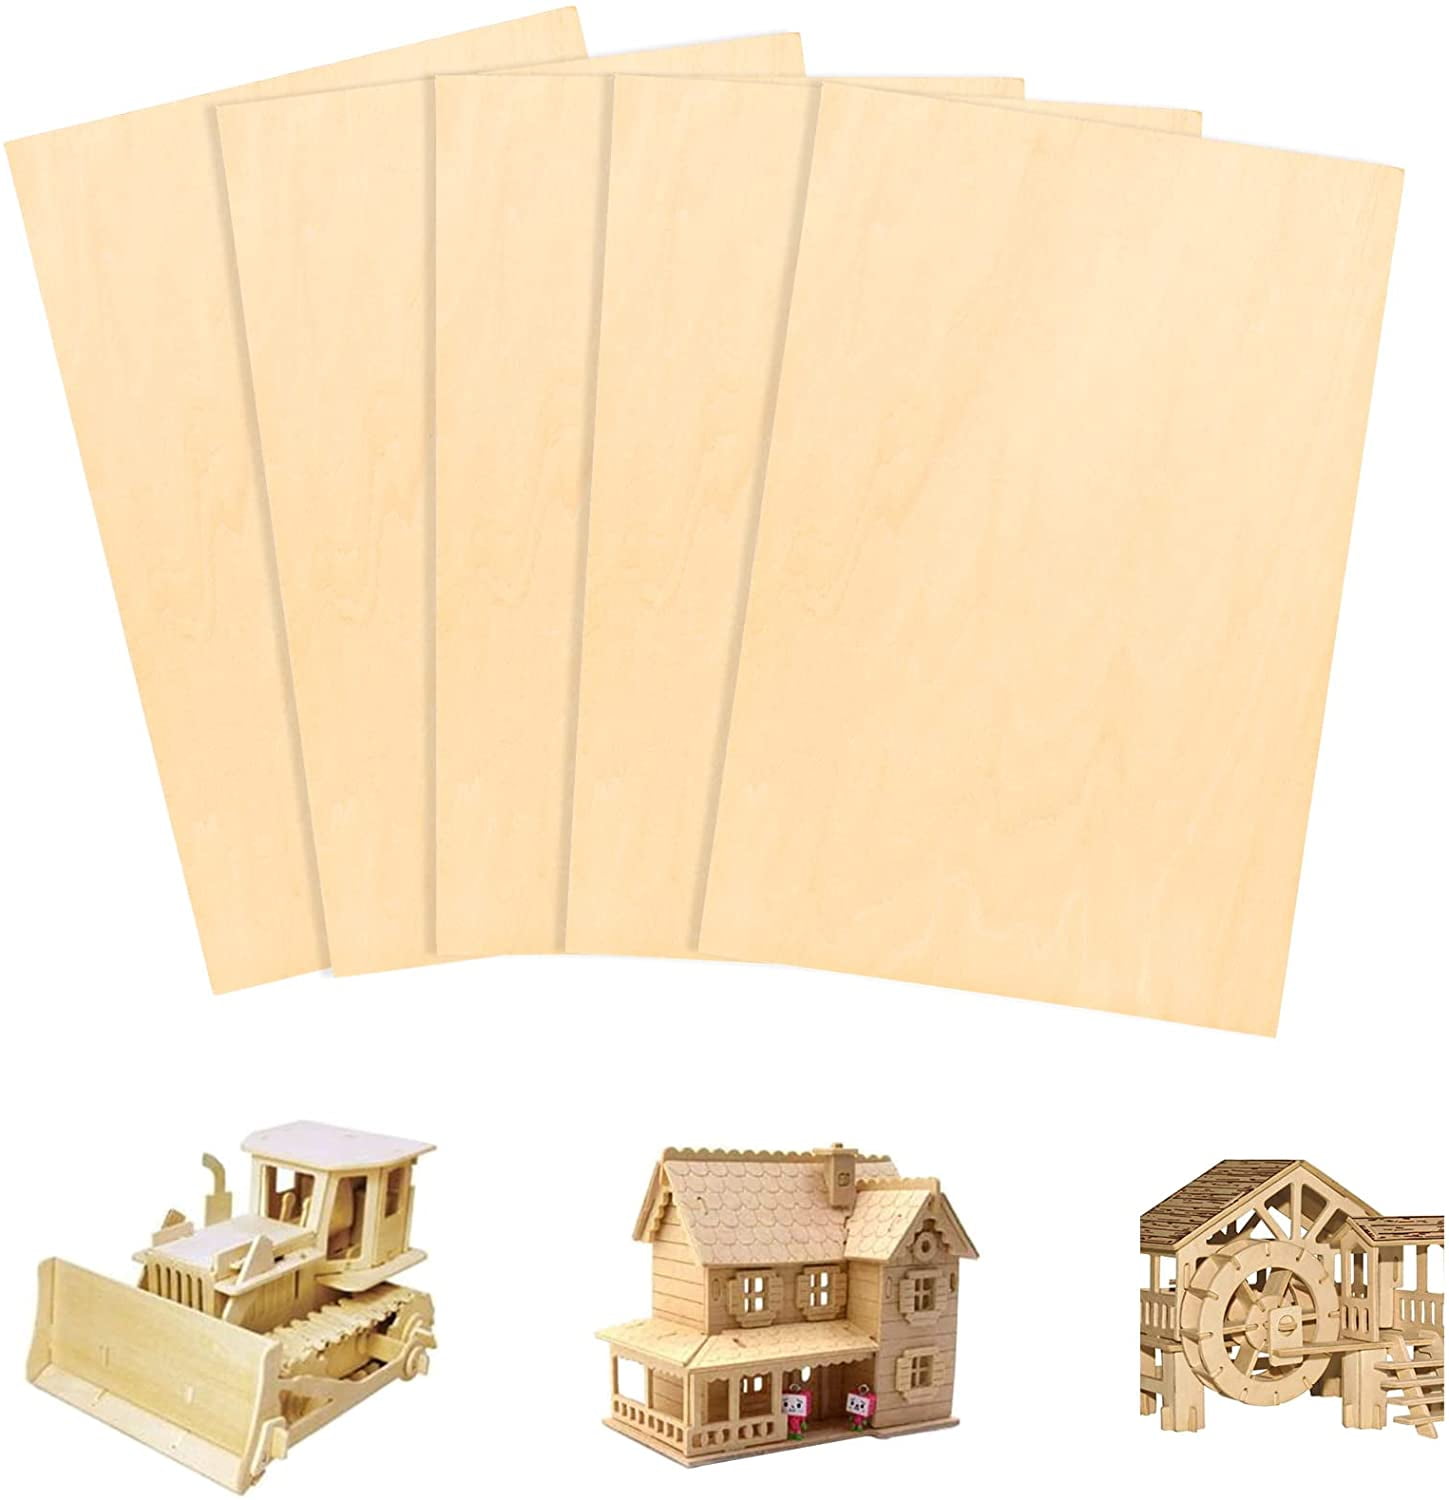 Basswood Sheets